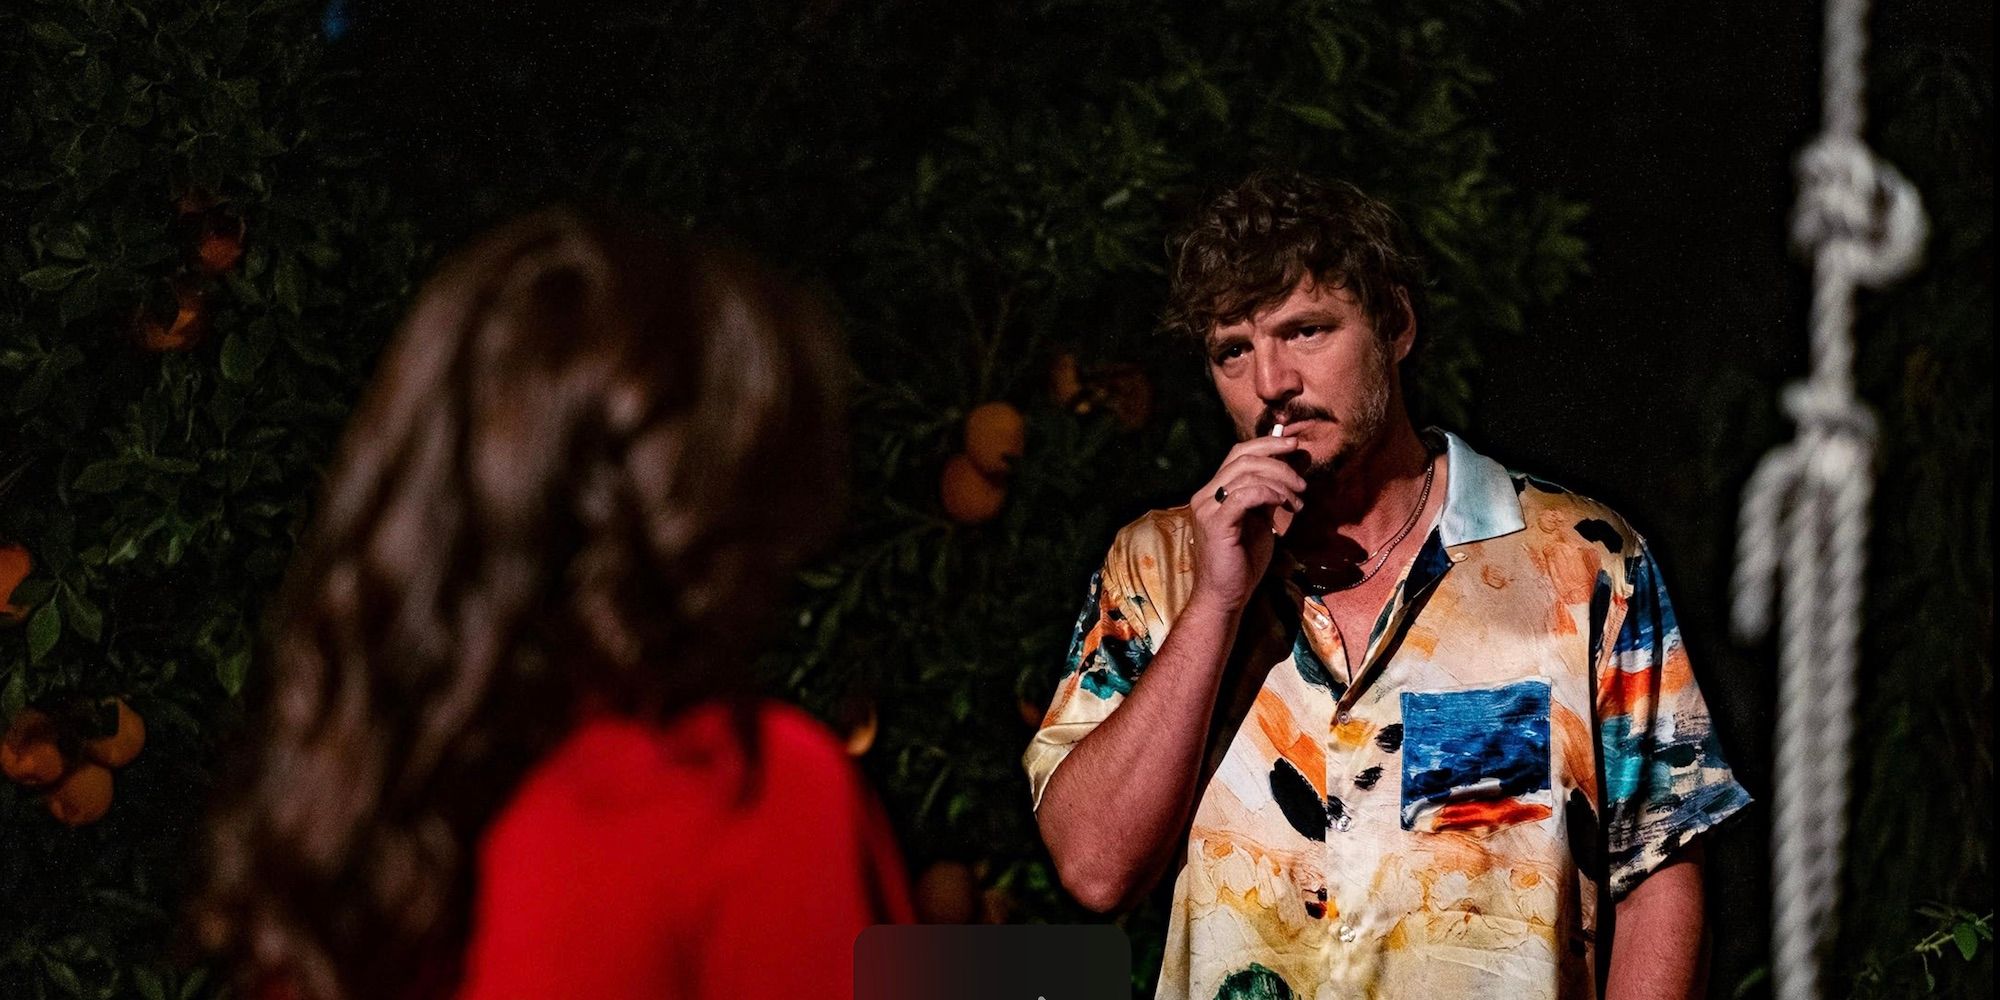 Pedro Pascal & Elizabeth Reaser stand together in the garden while Pascal smokes in The Uninvited